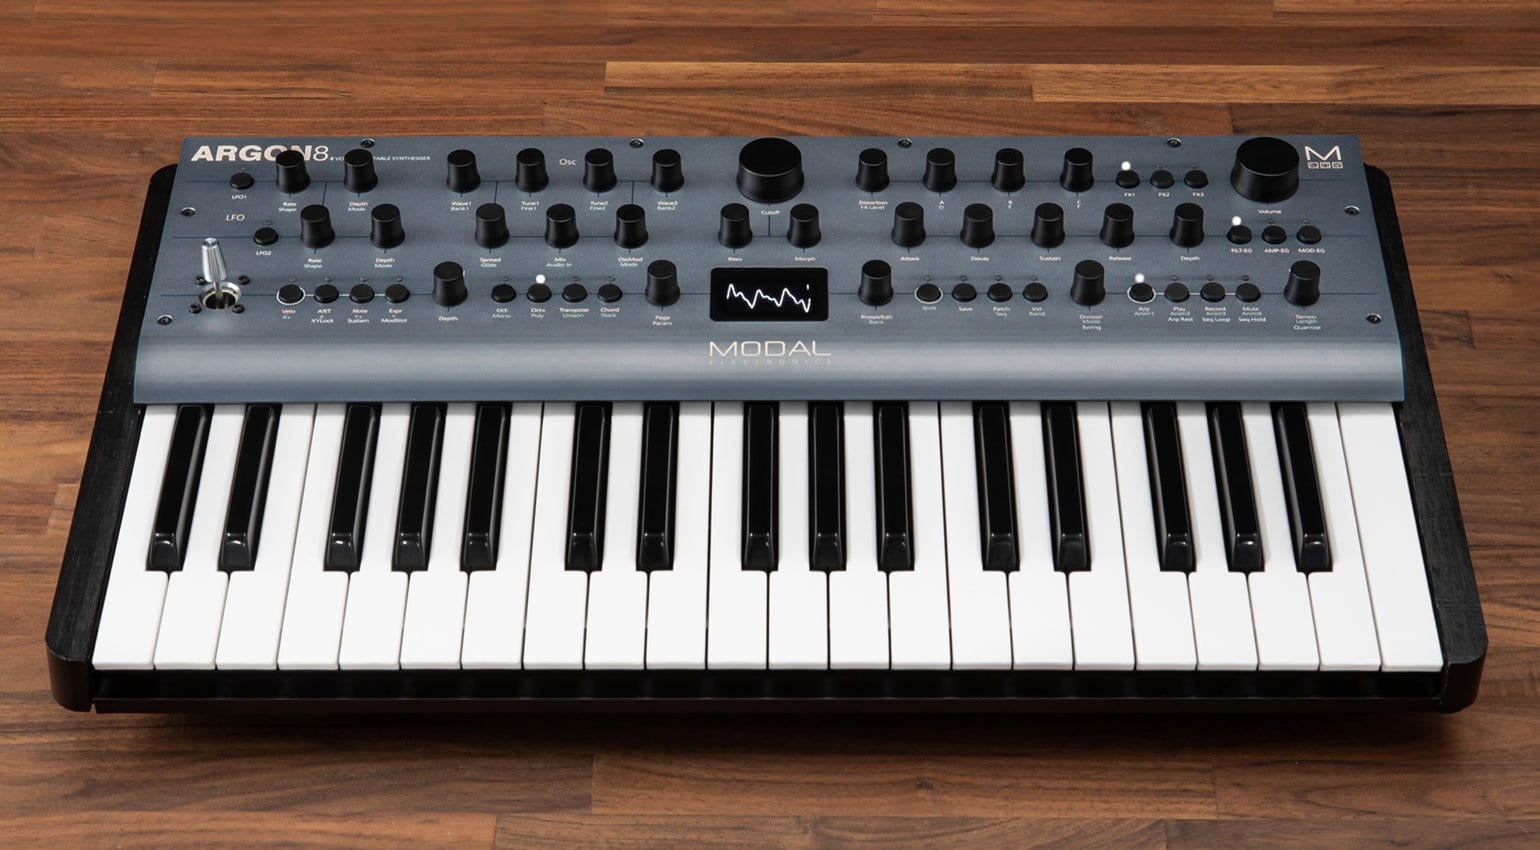 Best wavetable synthesizers: Modal Argon8